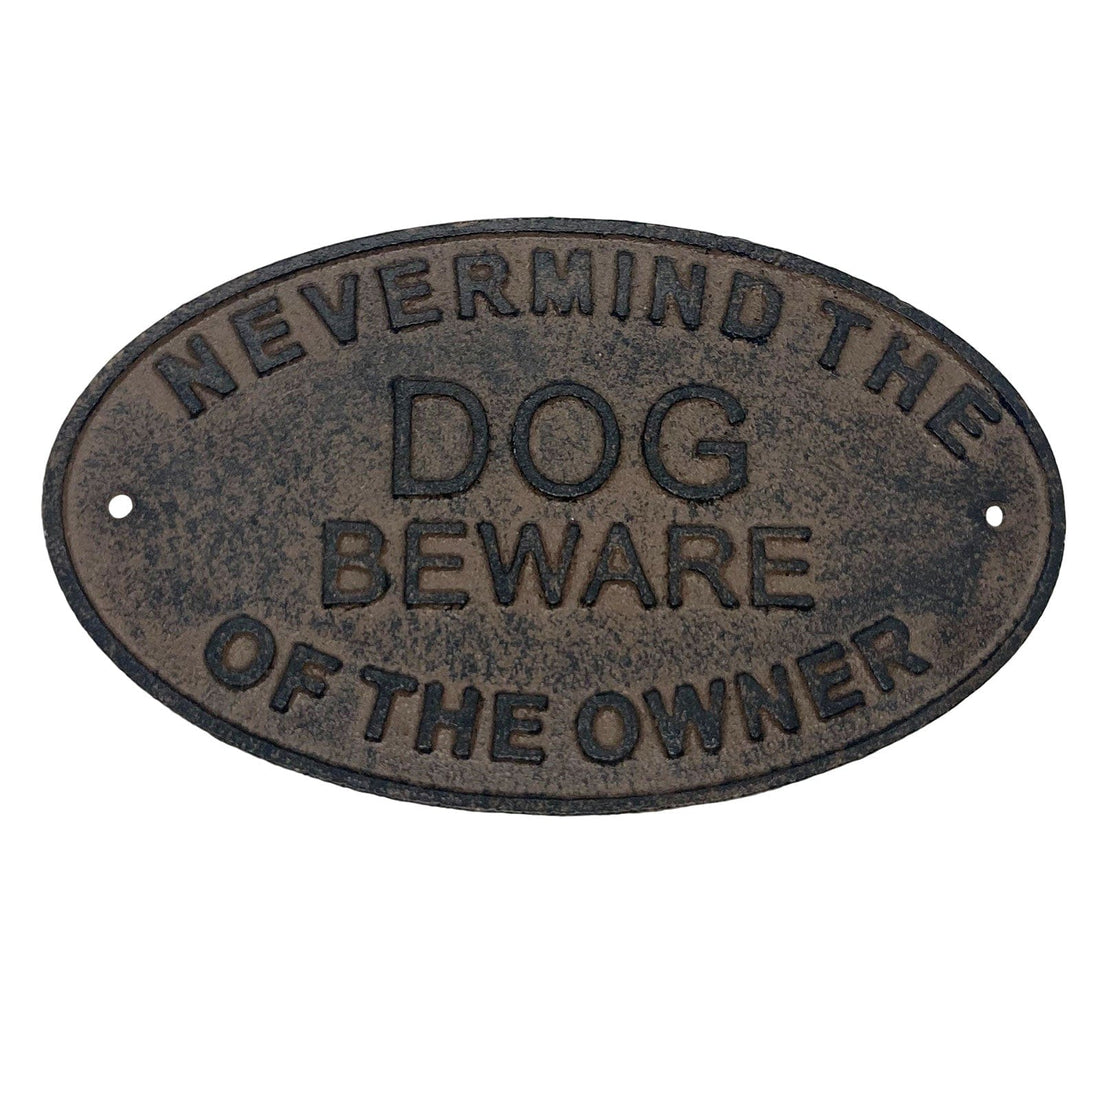 Never Mind the Dog Beware of the Owner Cast Iron Sign